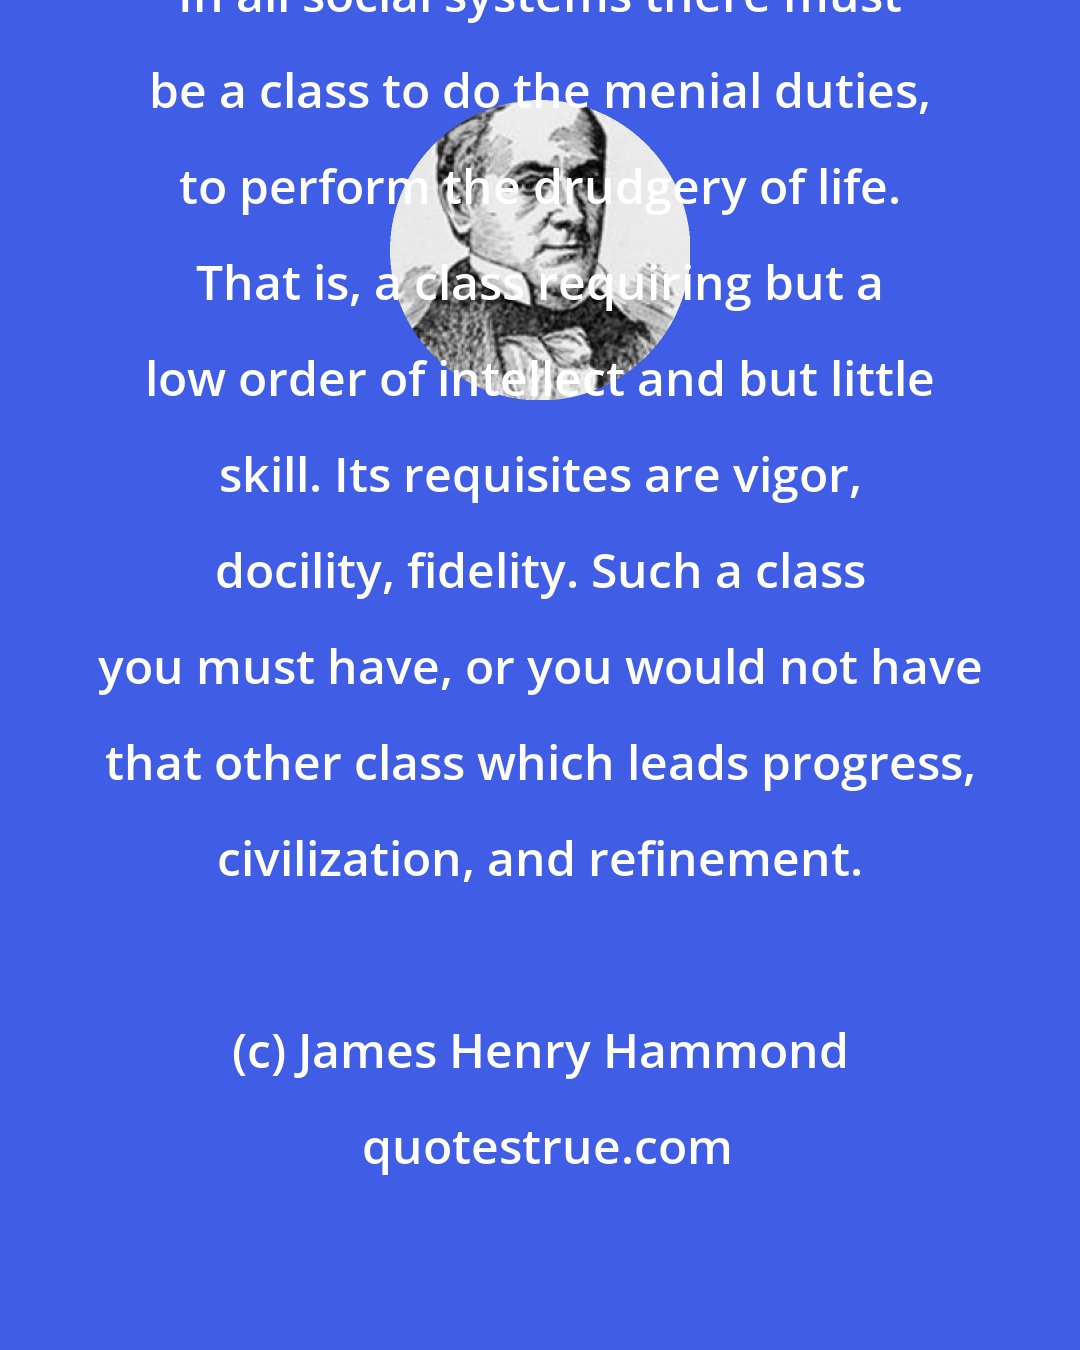 James Henry Hammond: In all social systems there must be a class to do the menial duties, to perform the drudgery of life. That is, a class requiring but a low order of intellect and but little skill. Its requisites are vigor, docility, fidelity. Such a class you must have, or you would not have that other class which leads progress, civilization, and refinement.